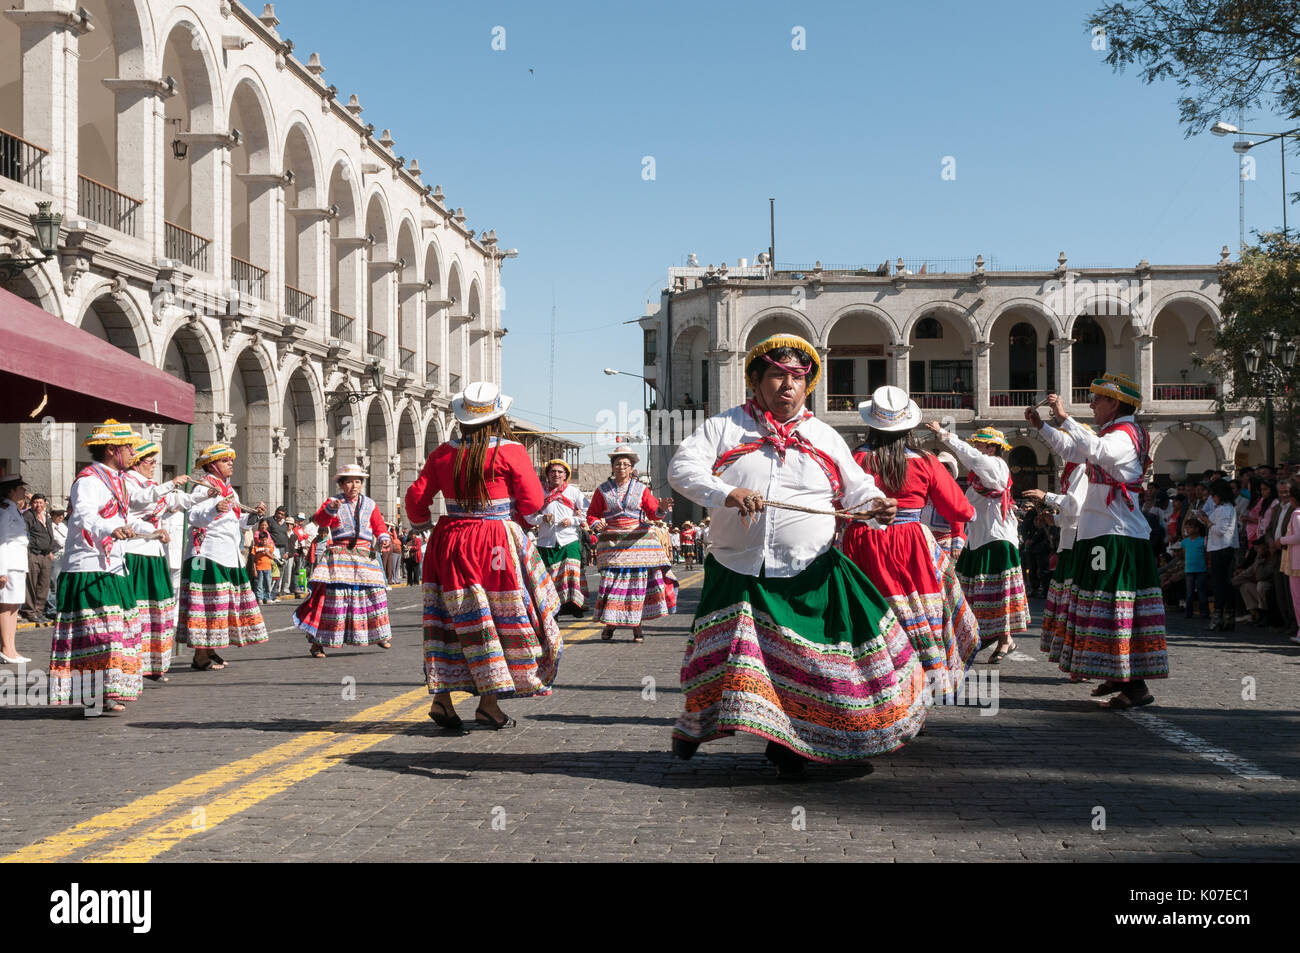 A group of farmers dressed in traditional clothing dances along a cobbled street near Plaza de Armas, Arequipa, Peru. Stock Photo